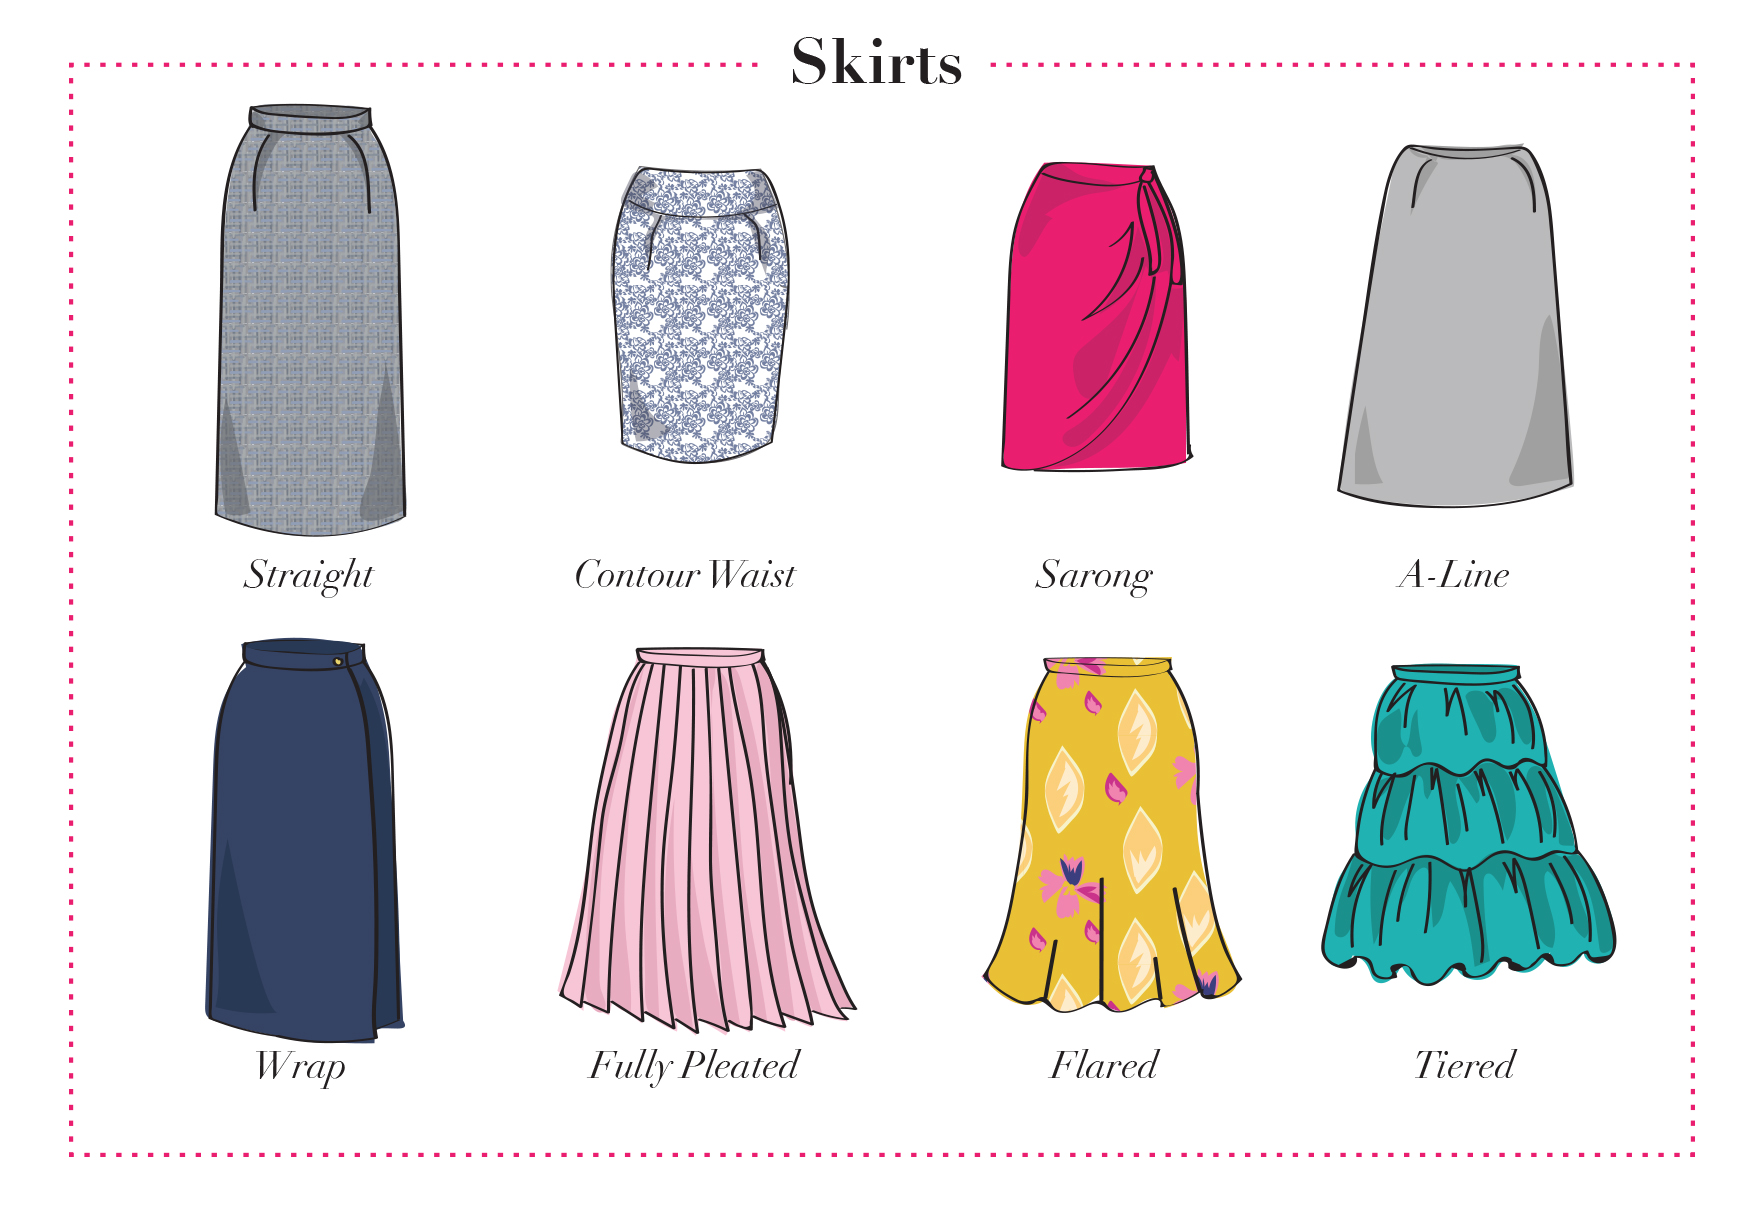 The Guide To Easy Dressing Skirts And Jackets Image Intelligence | vlr ...